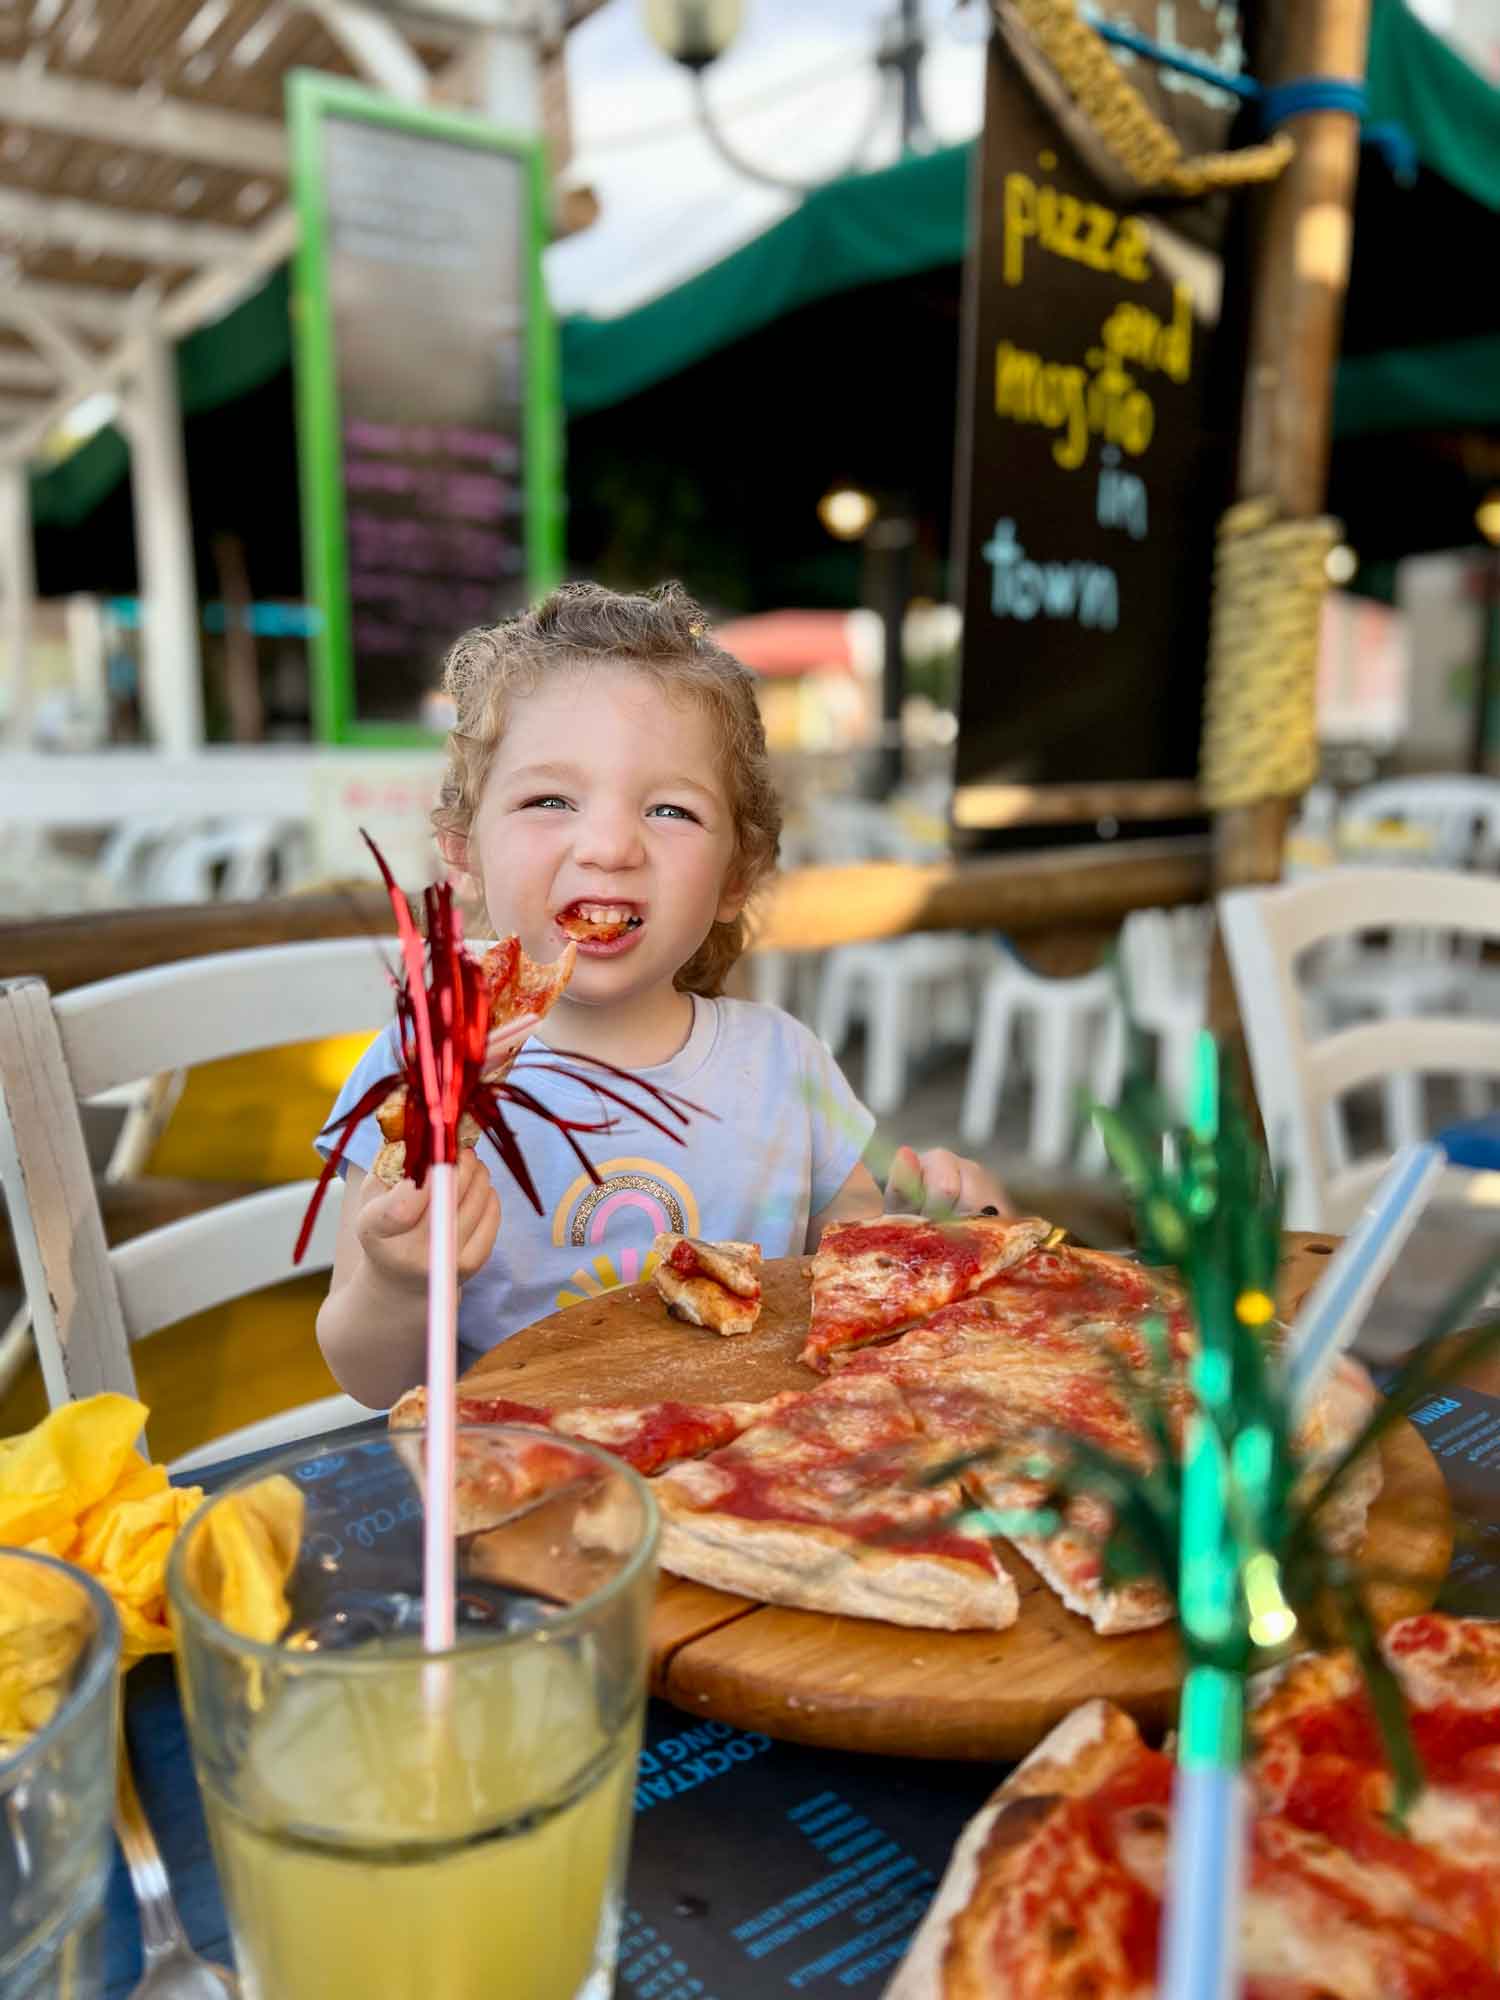 Kid smiling eating pizza